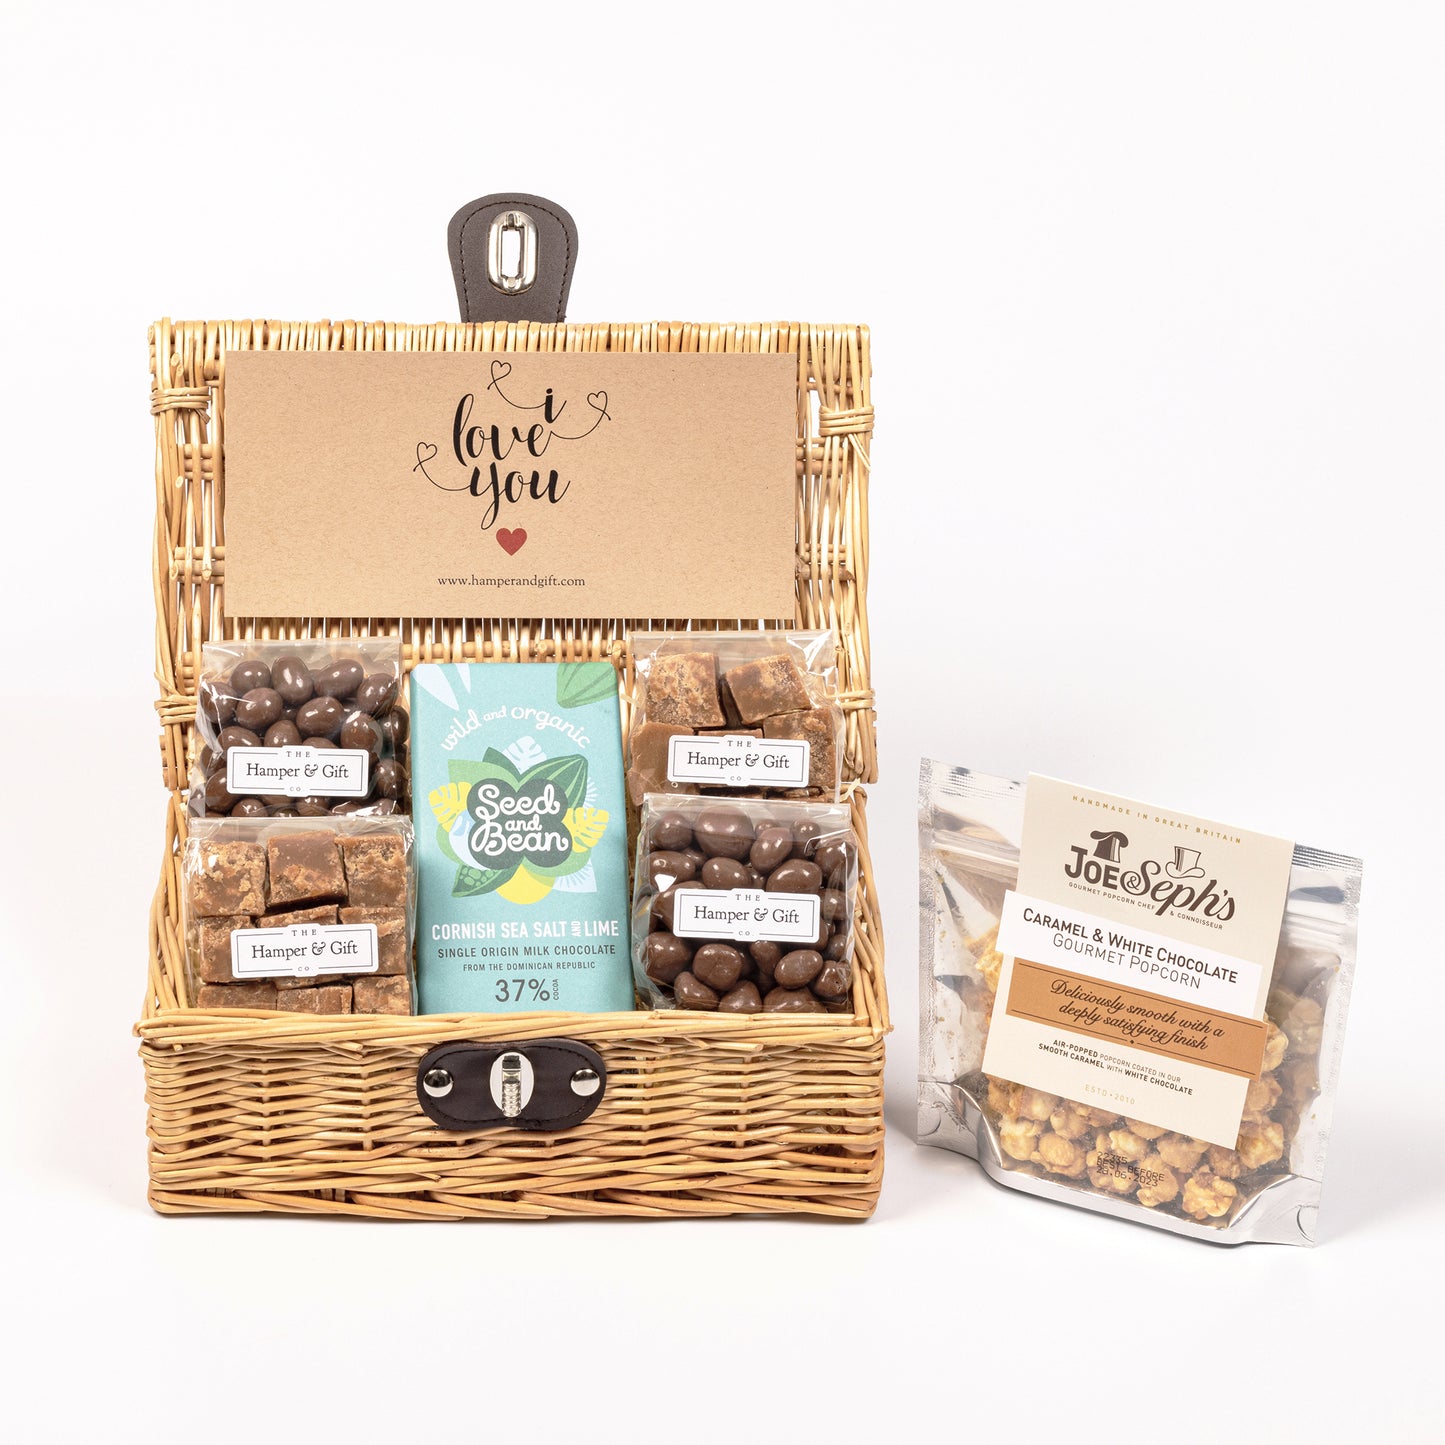 I Love You Hamper filled with chocolate, fudge and gourmet popcorn